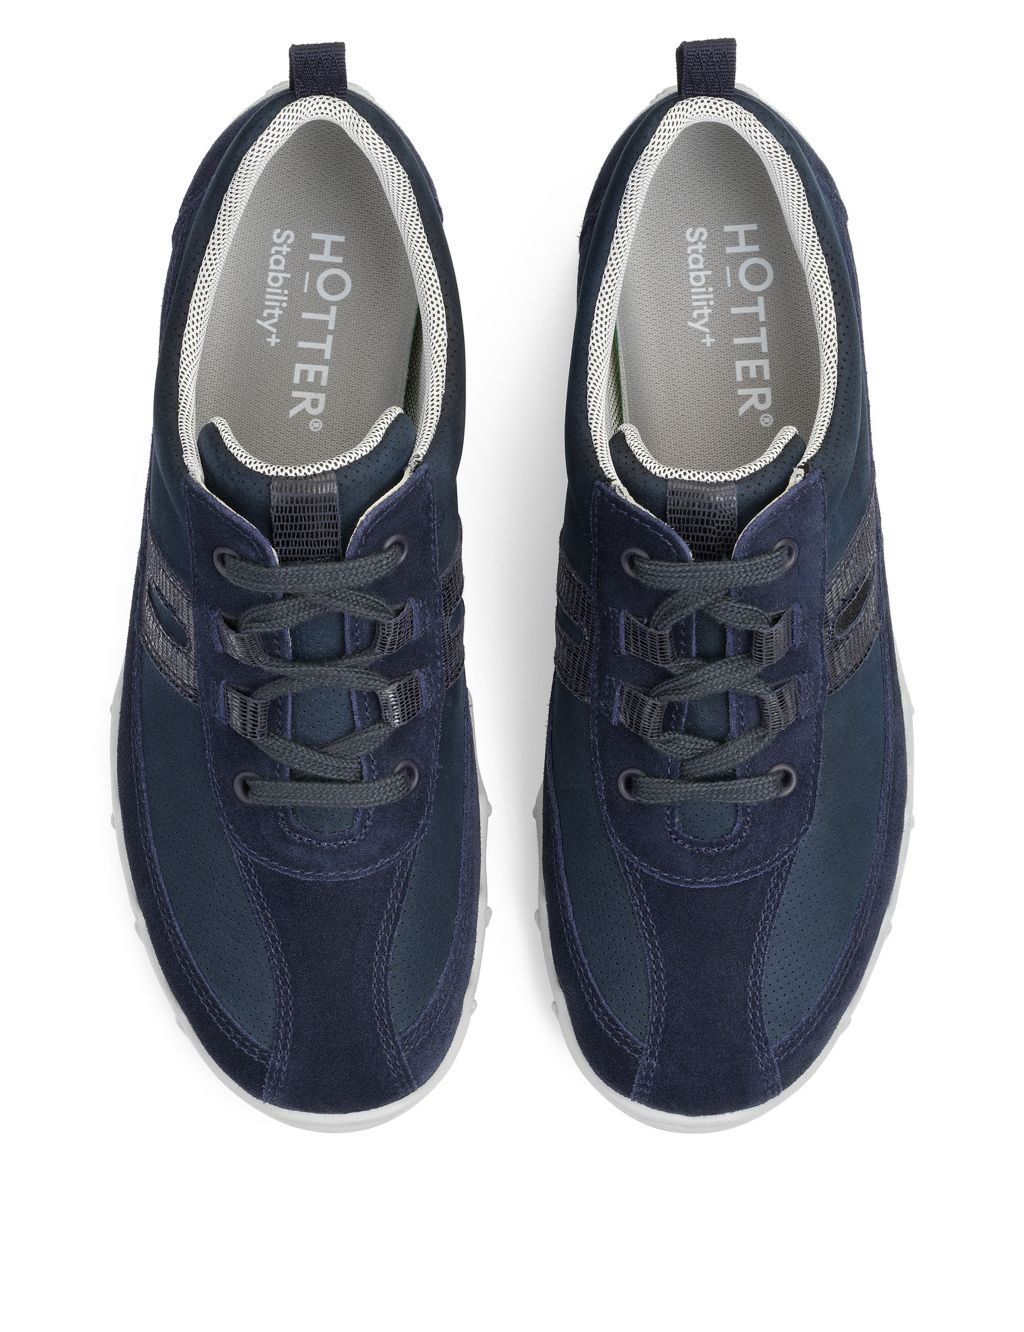 Leanne II Suede Lace Up Trainers image 2